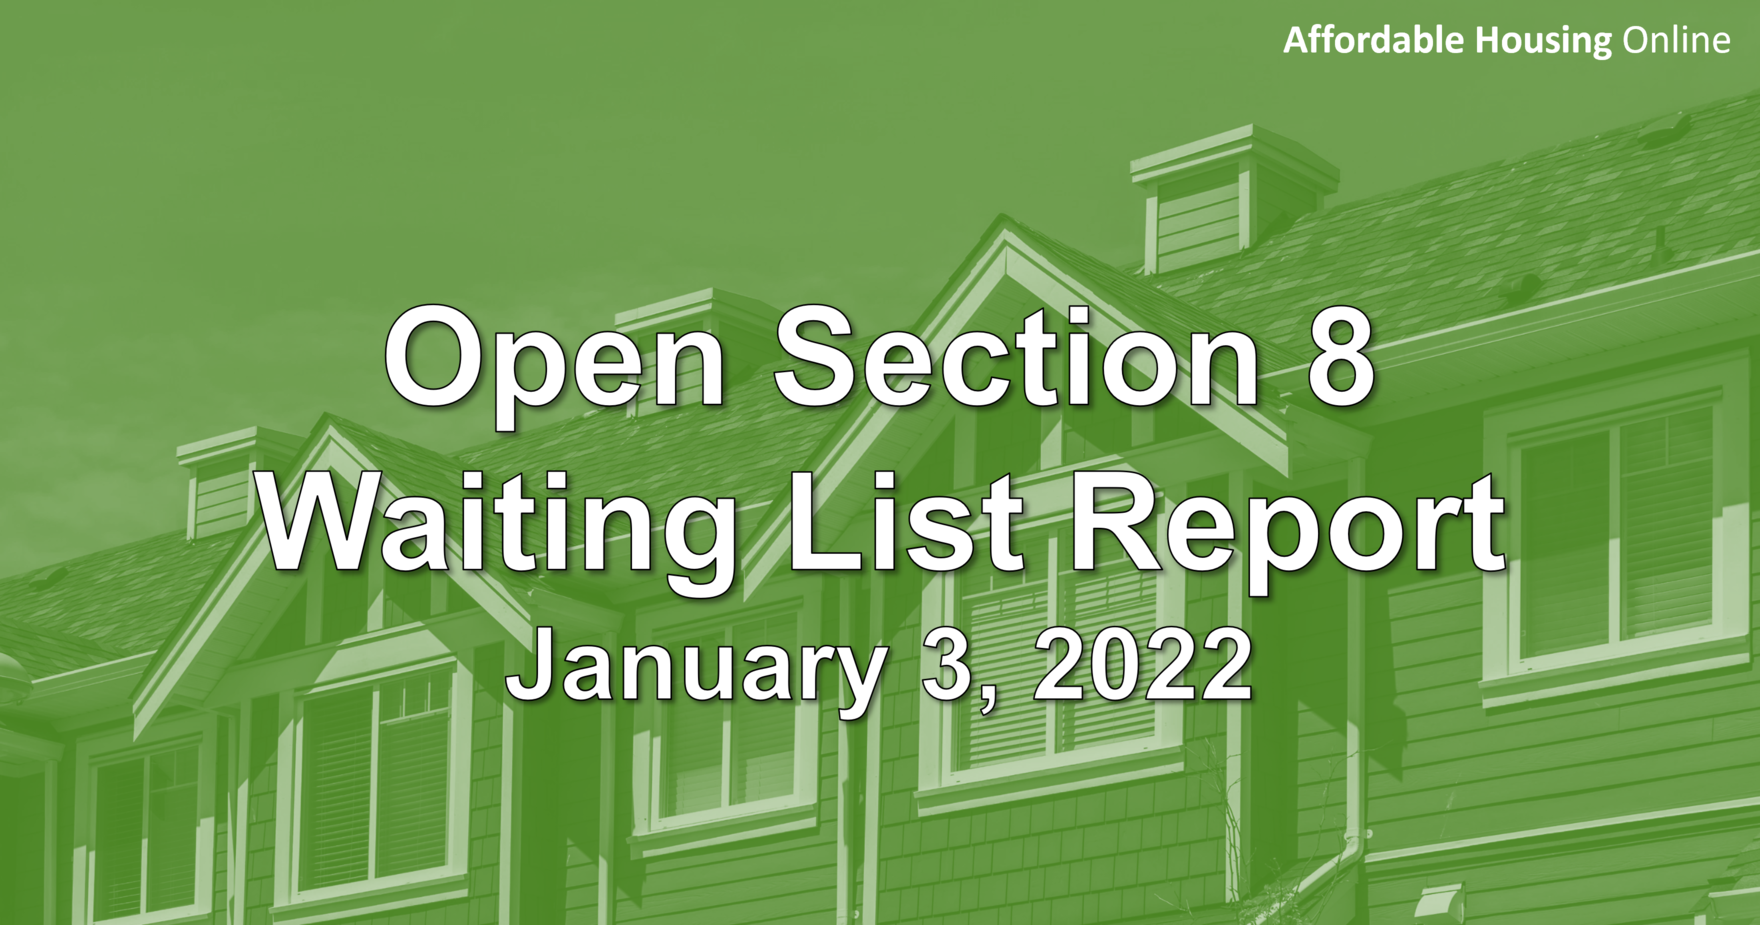 Open Section 8 Waiting List Report Banner image for January 3, 2022